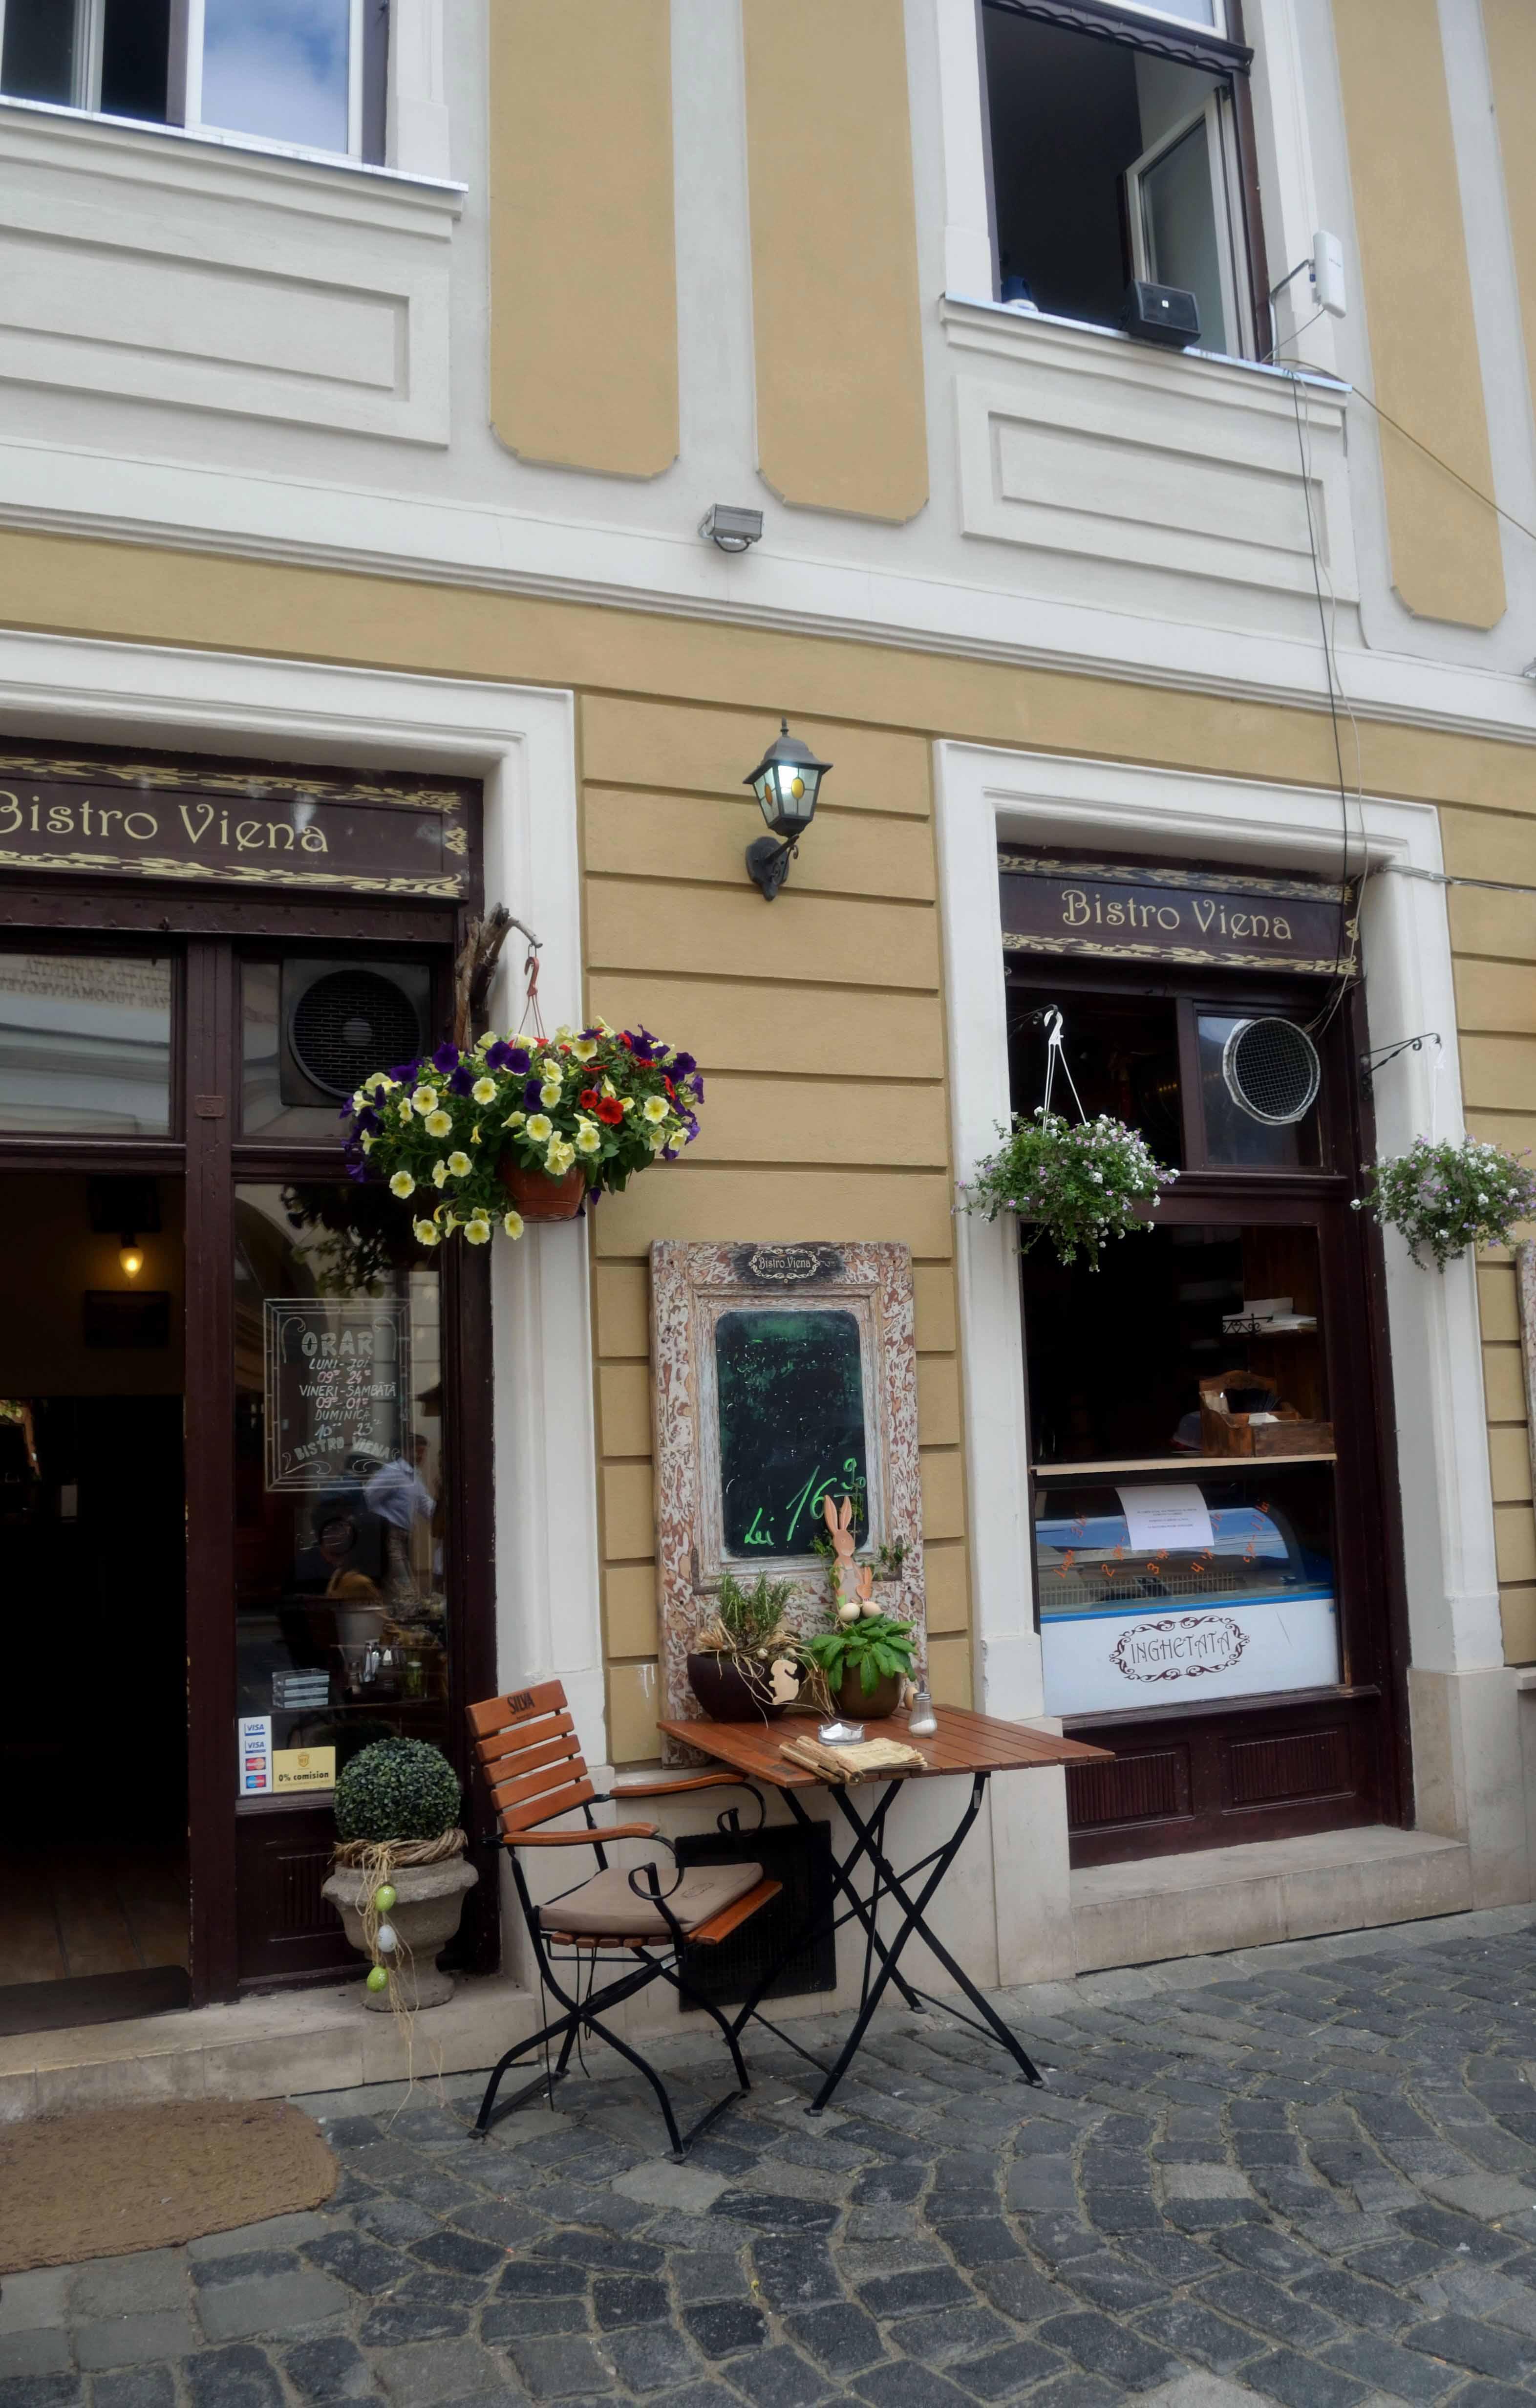 Cover image of this place Bistro Viena